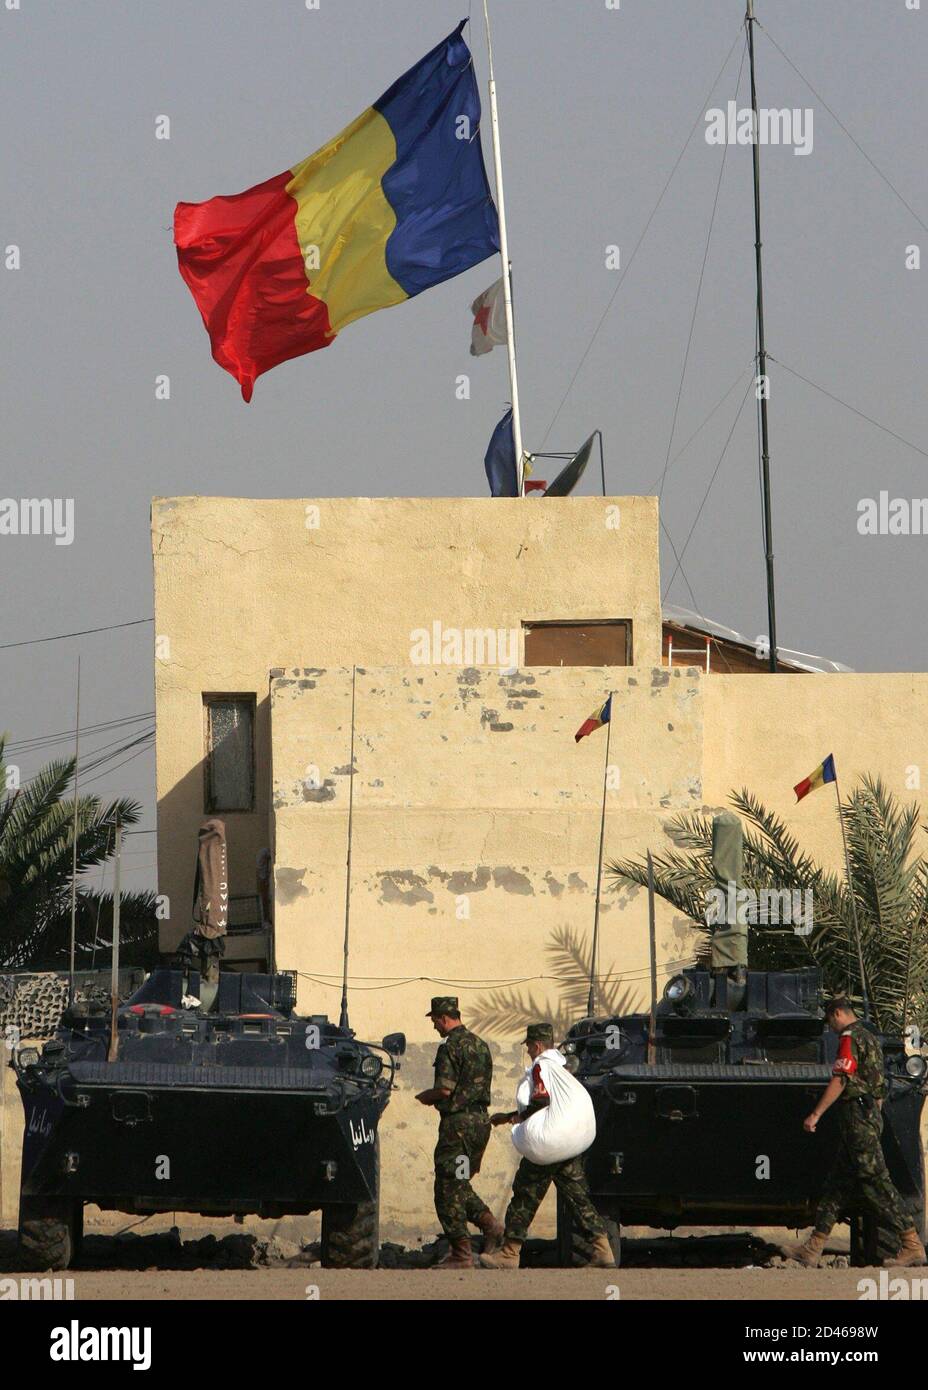 The Romanian flag waves in the wind on top of the headquarters building of the Romanian military force in Tallil Air Base.  The Romanian flag waves in the wind on top of the headquarters building of the Romanian military force in Tallil Air Base, approximately 310 km (192 miles) southeast of Baghdad, April 1, 2005. In the latest foreign hostage crisis, three Romanian journalists and their translator - who holds Iraqi, American and Romanian citizenship - were abducted this week in Baghdad. Insurgents later released a video showing them being held at gunpoint. REUTERS/Bob Strong Stock Photo